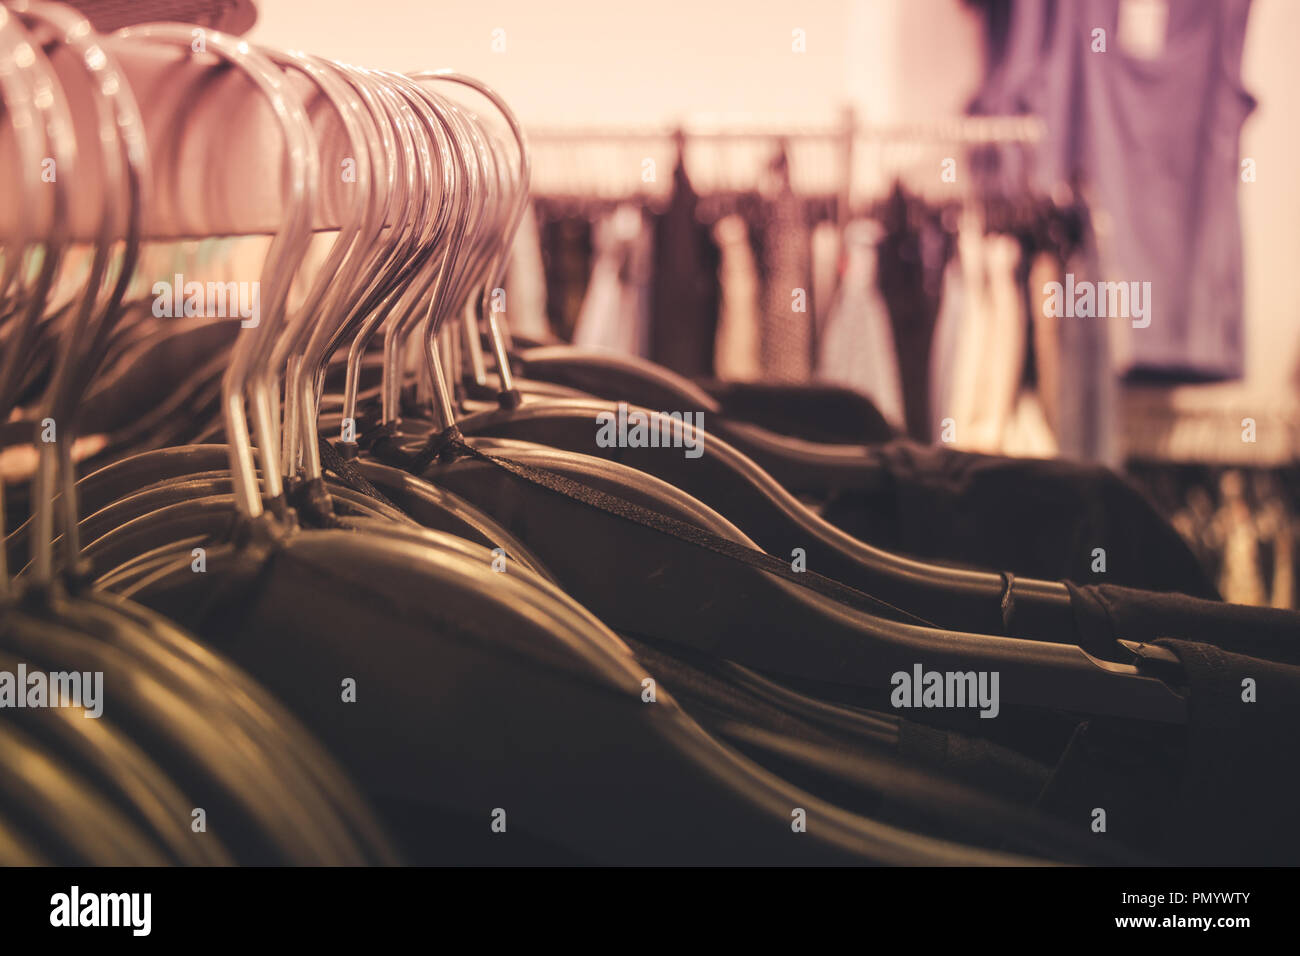 Close up of many clothes on hangers in a clothing shop. Stock Photo